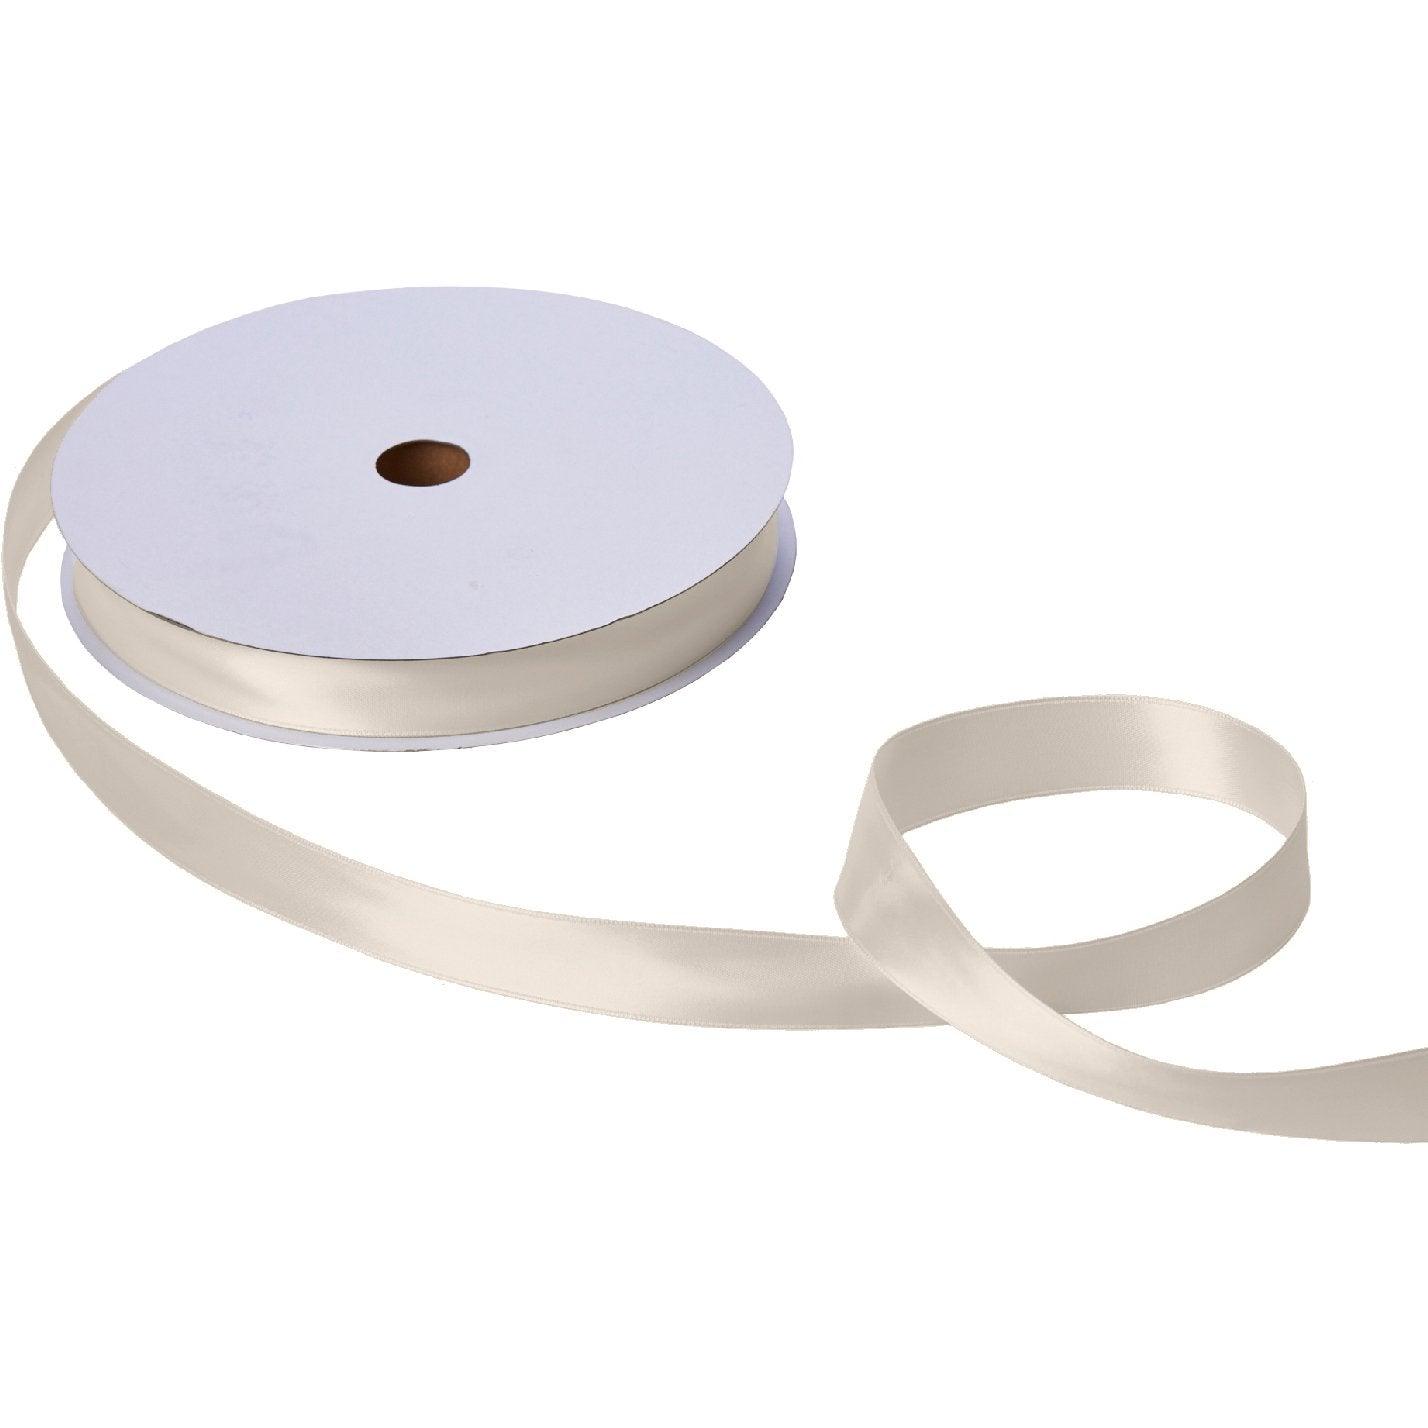 Jillson & Roberts Double-Faced Satin Ribbon, 1" Wide x 100 Yards, Ivory by Present Paper - Vysn